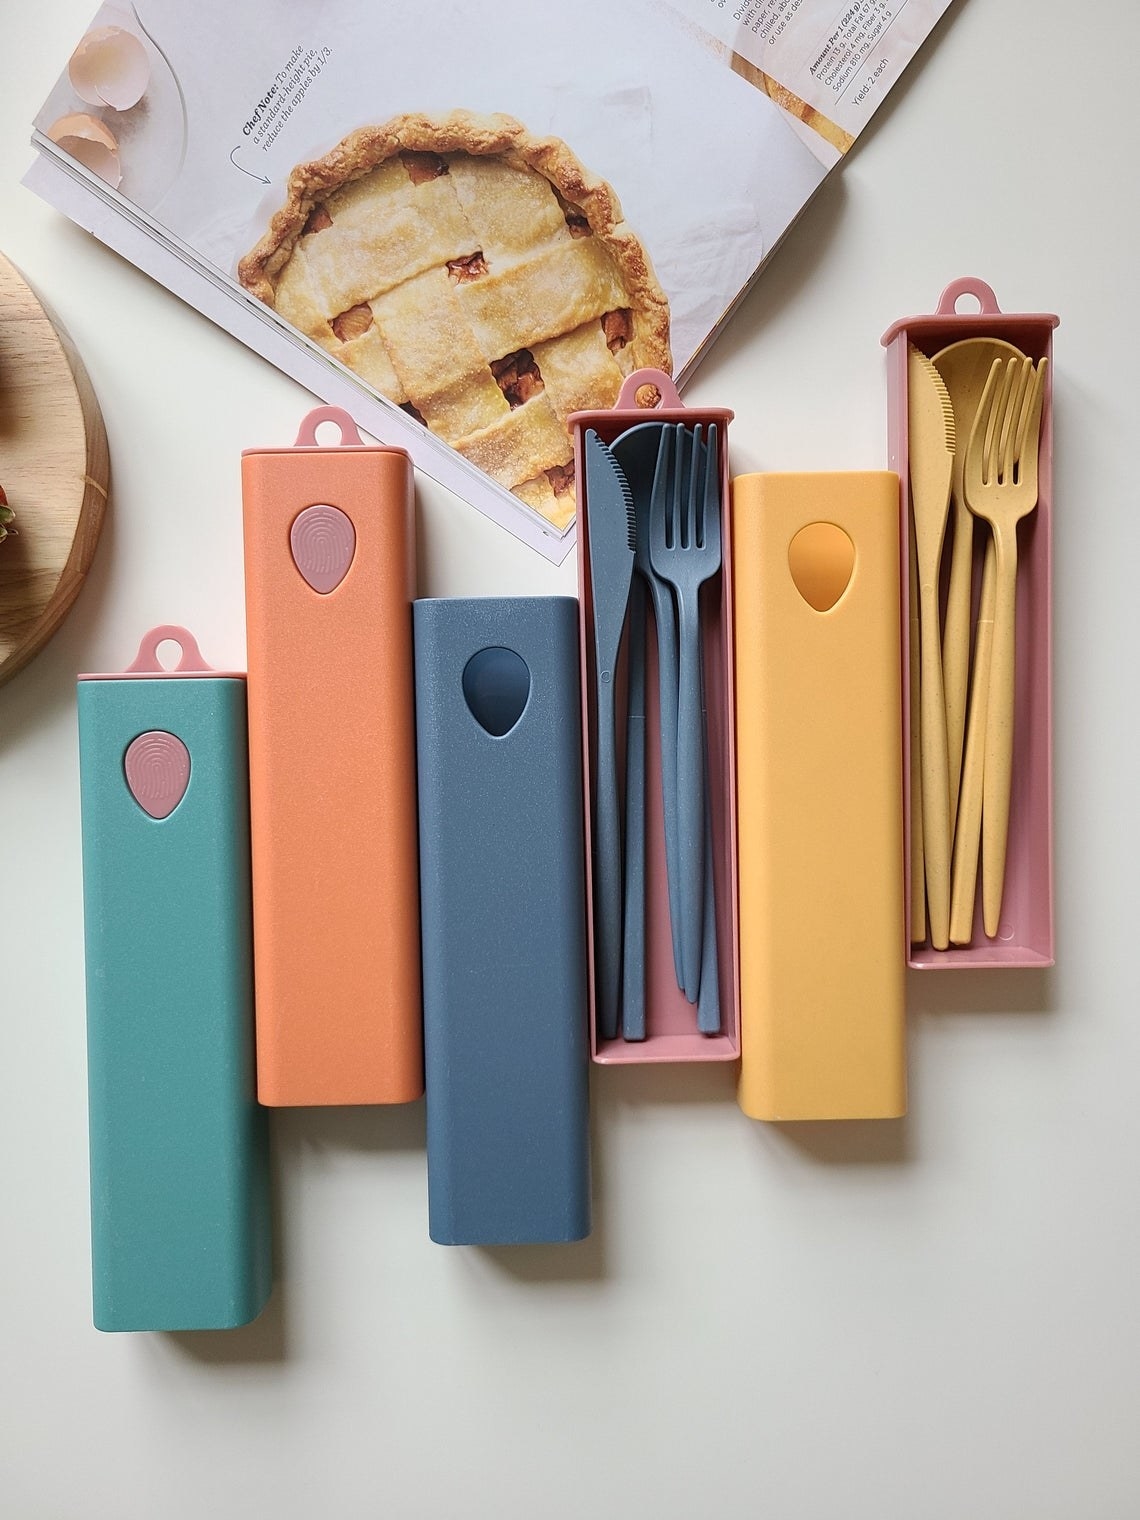 rectangular cases with fork spoon and knife inside